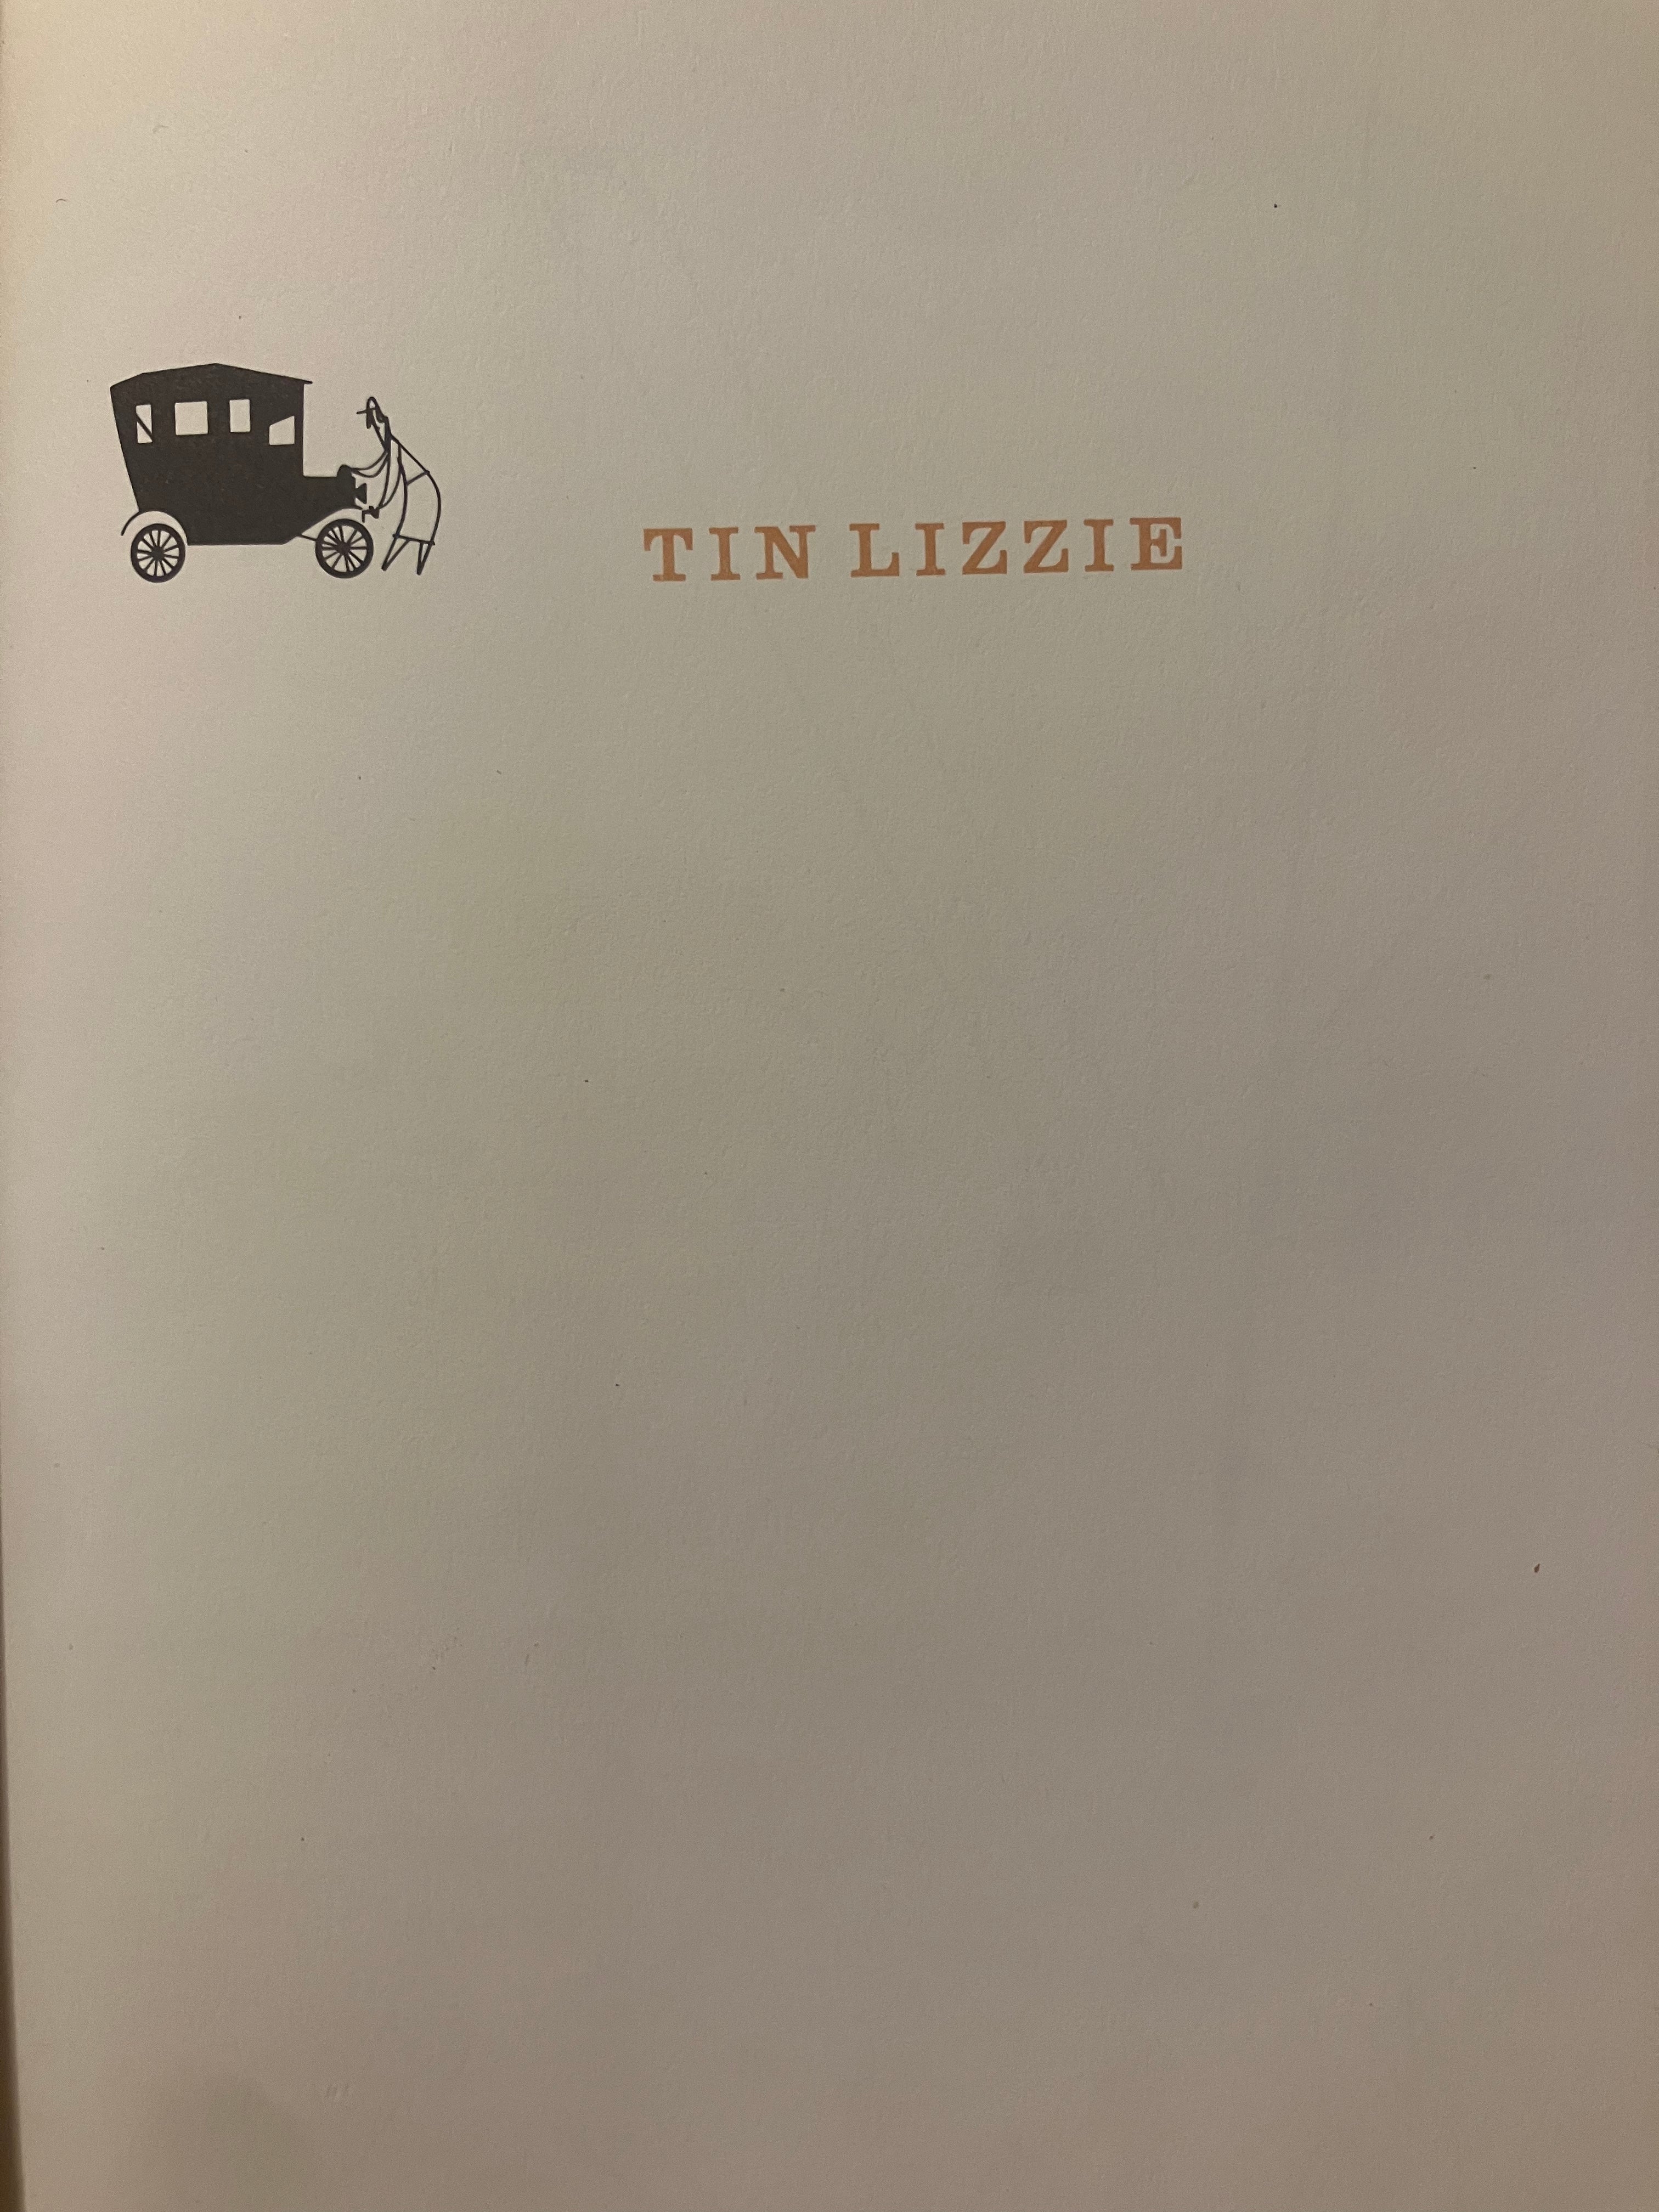 Tin Lizzie - the story of the fabulous model t Ford